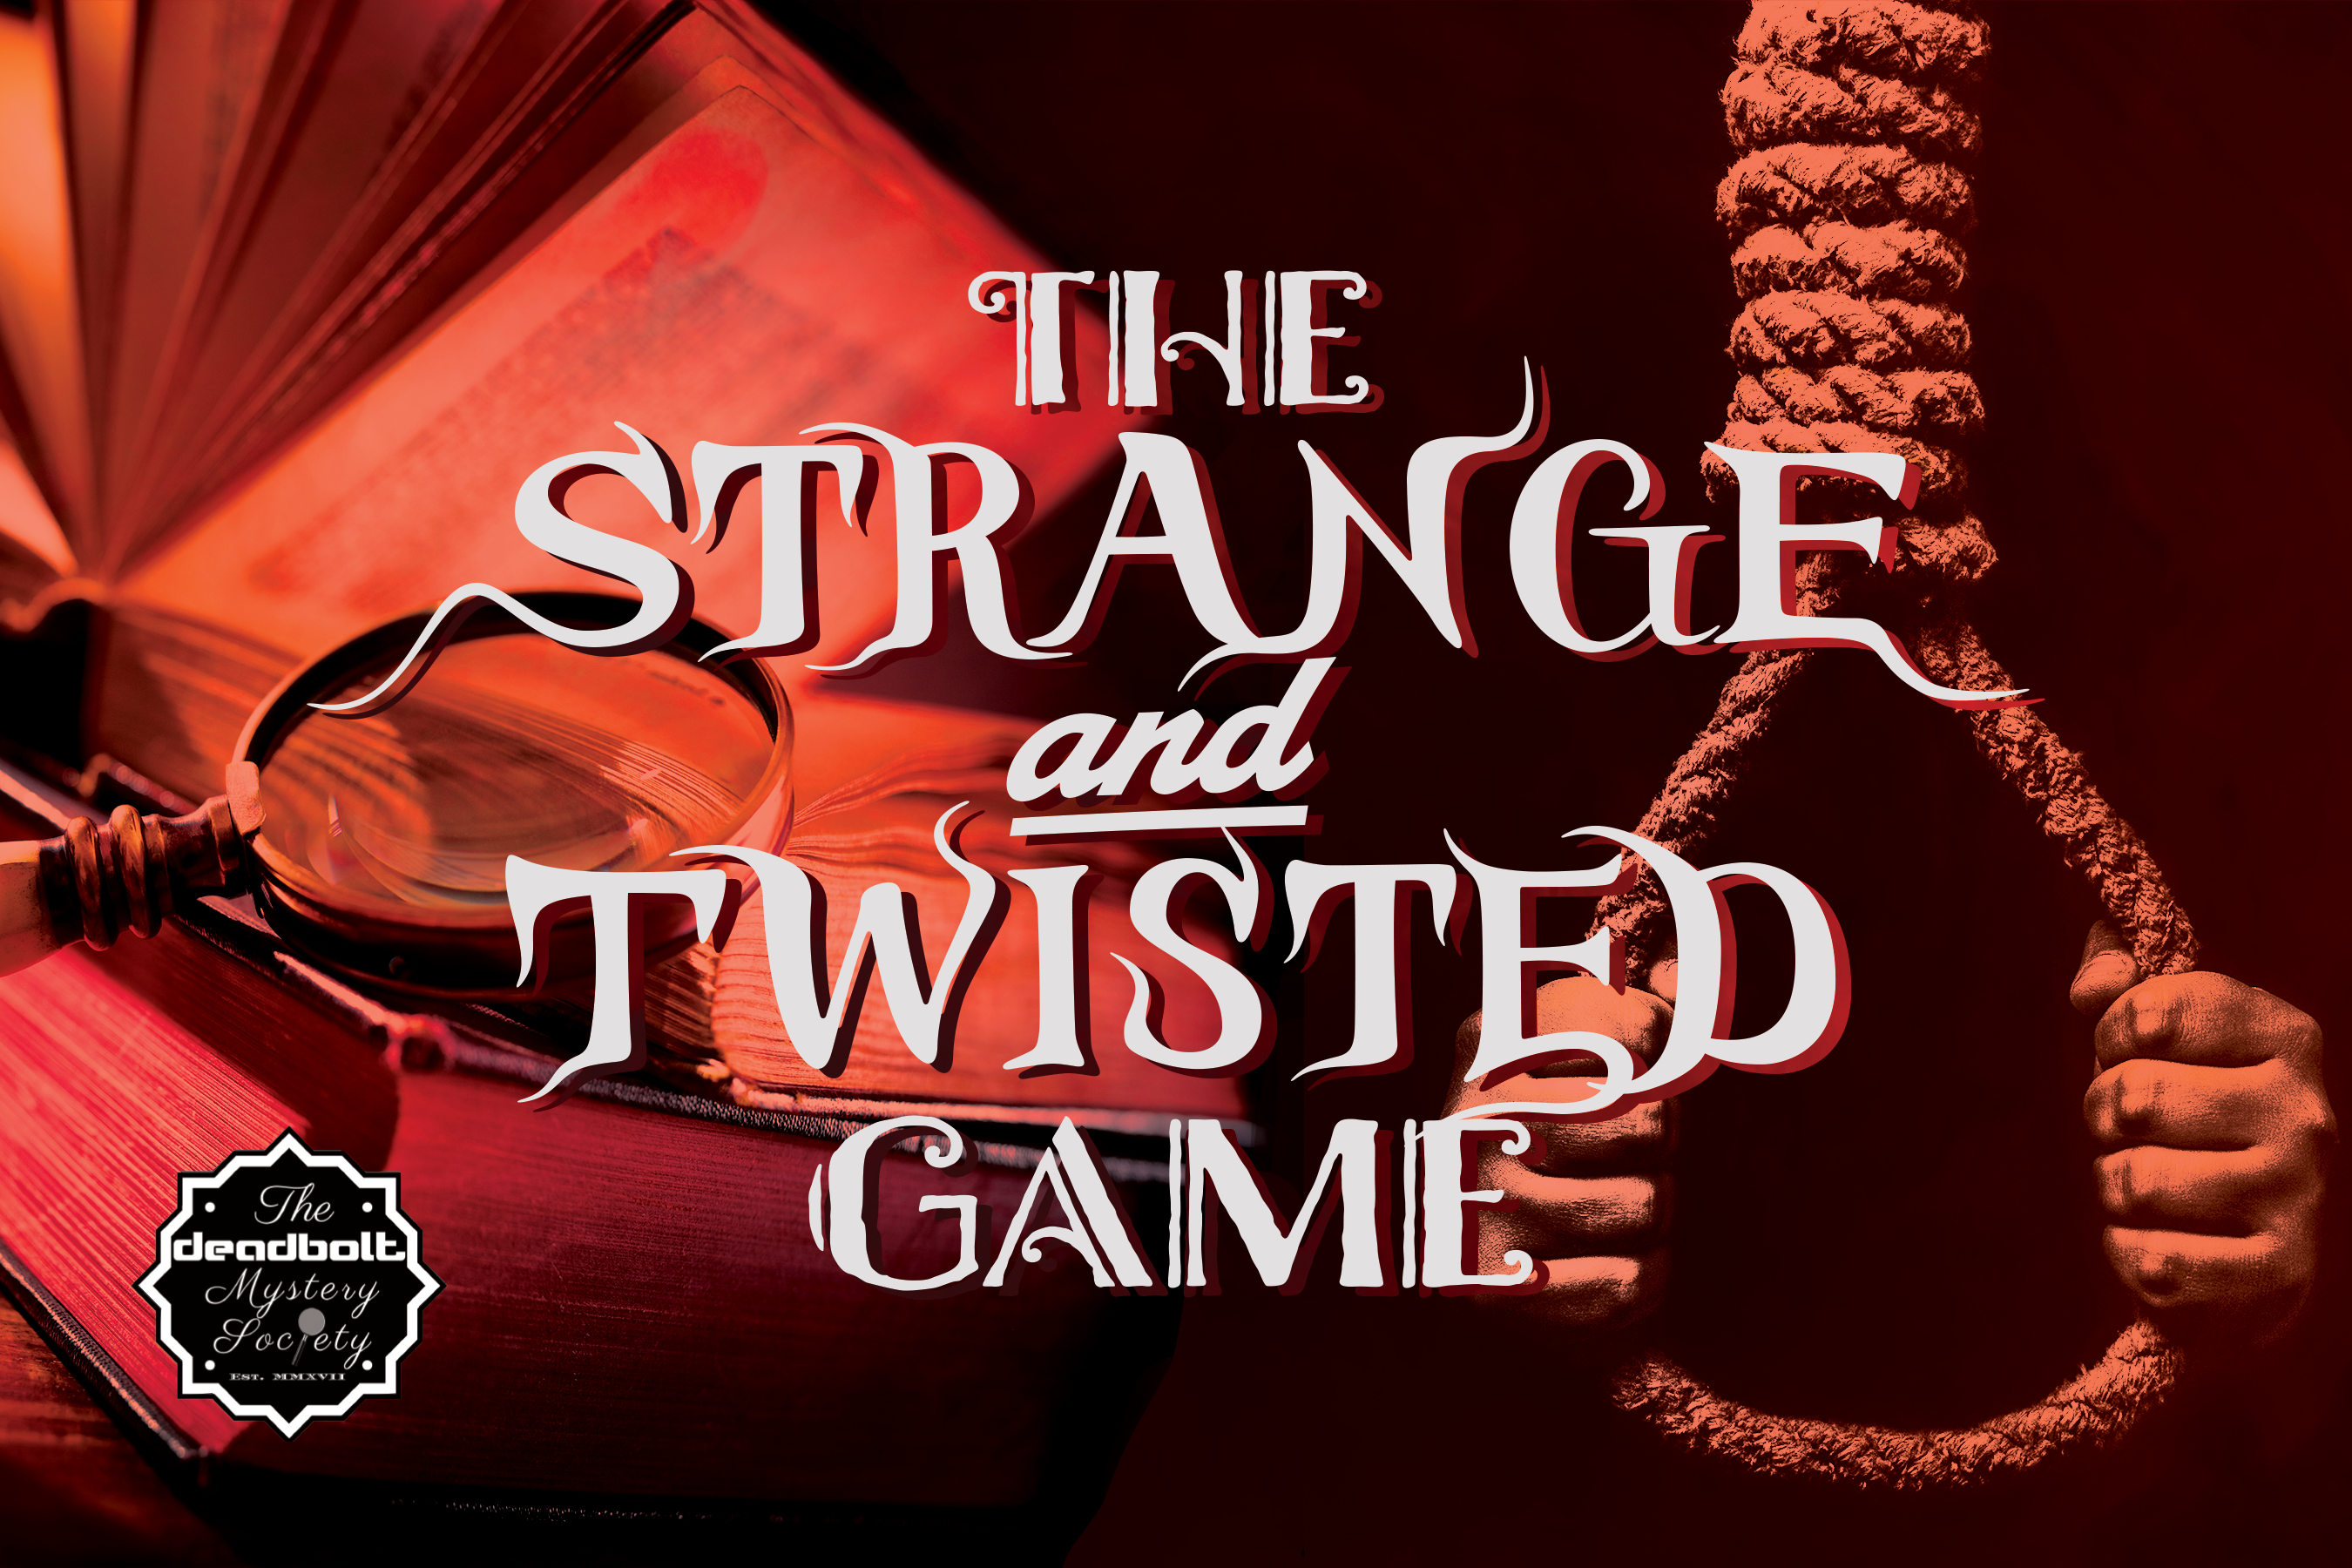 The Strange and Twisted Game